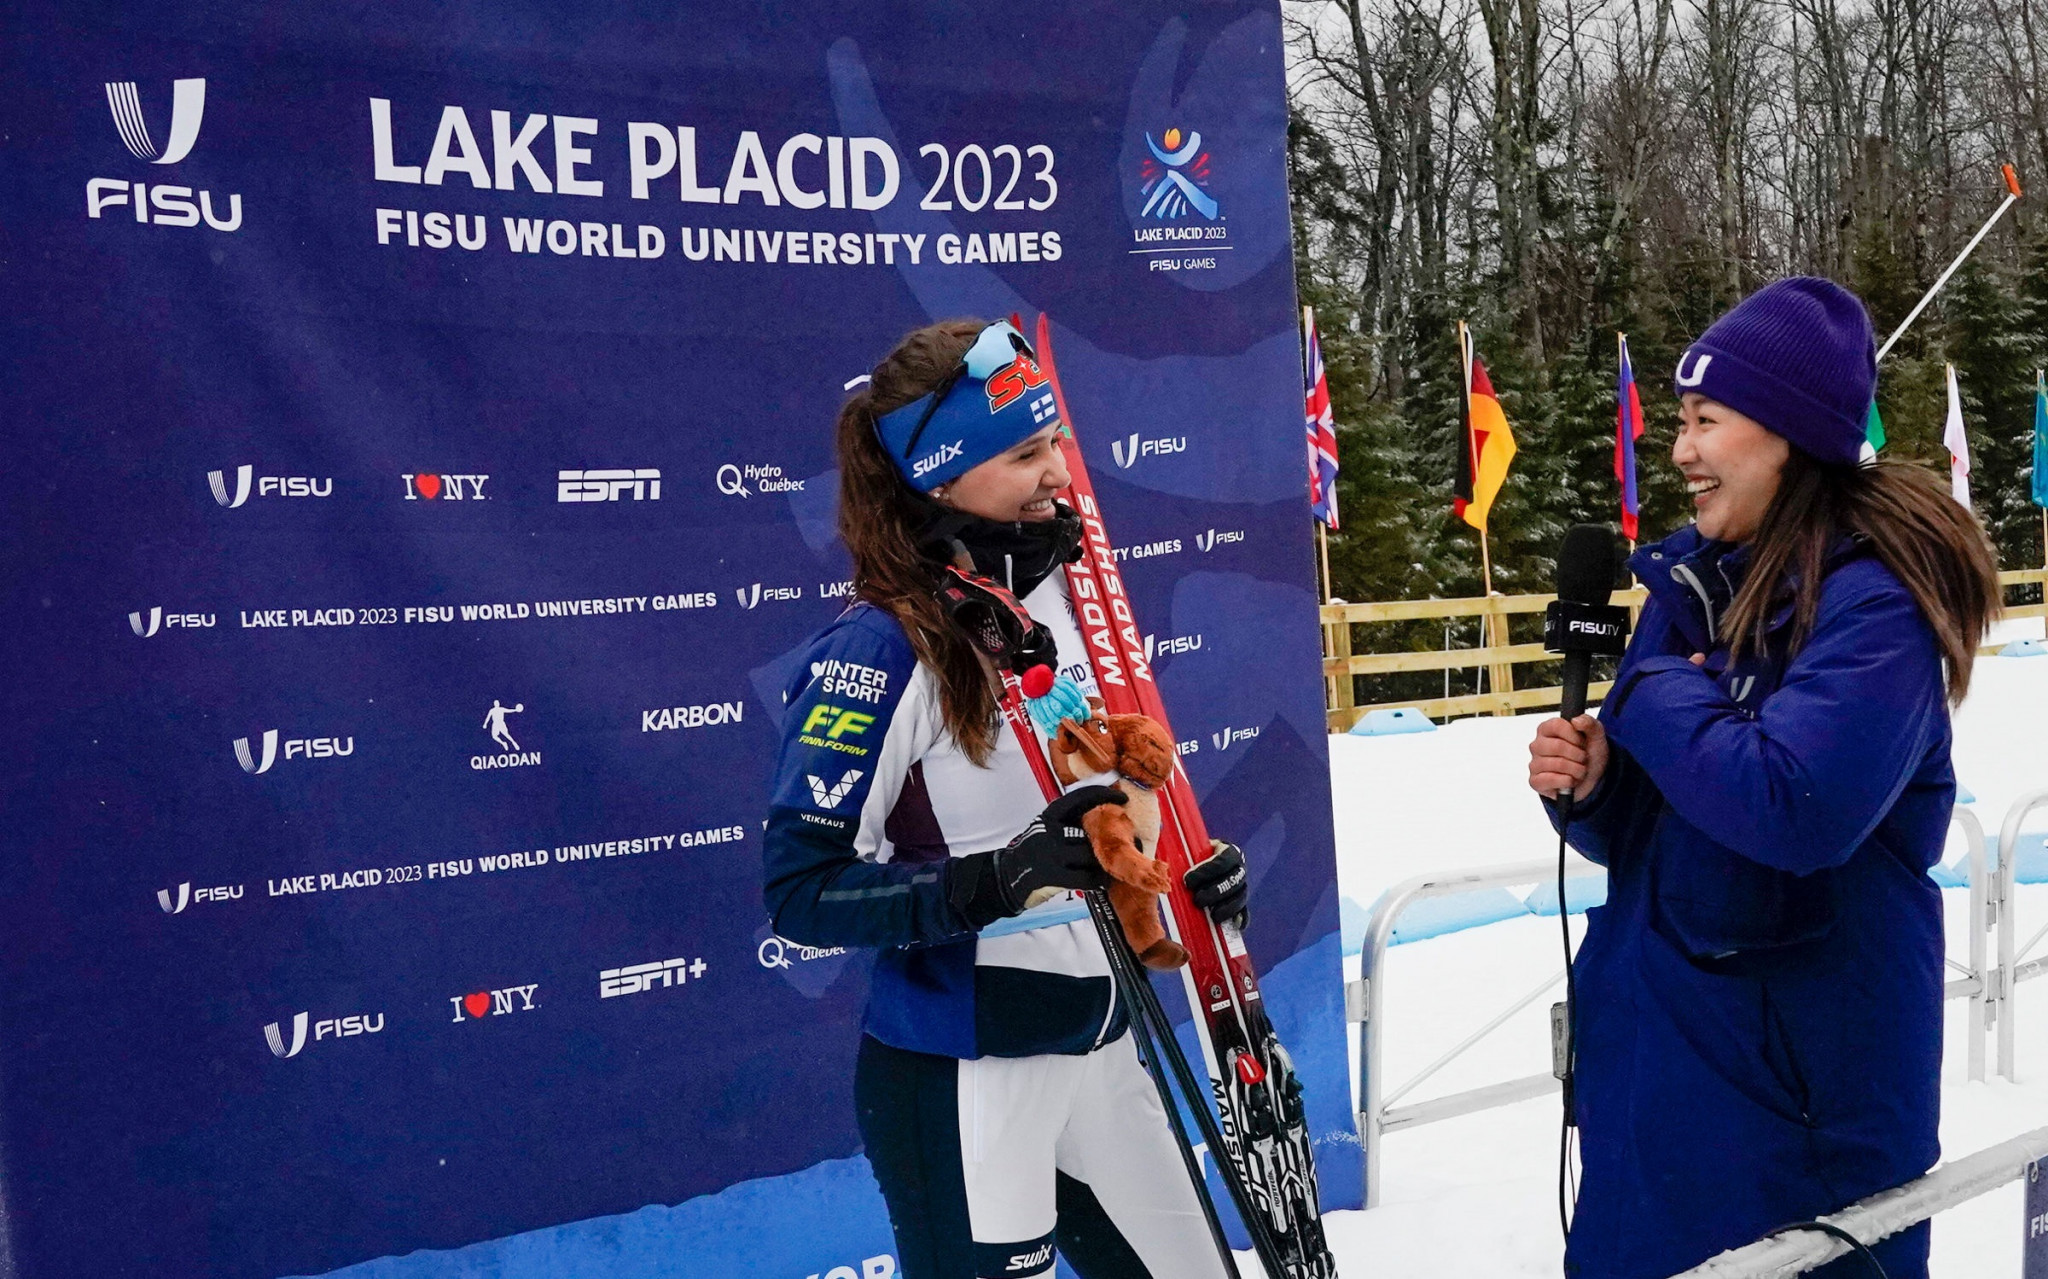 Finland's Hilla Niemela is interviewed by FISU Young Reporter Diana Hong after her victory in the women's 5km individual classic ©FISU